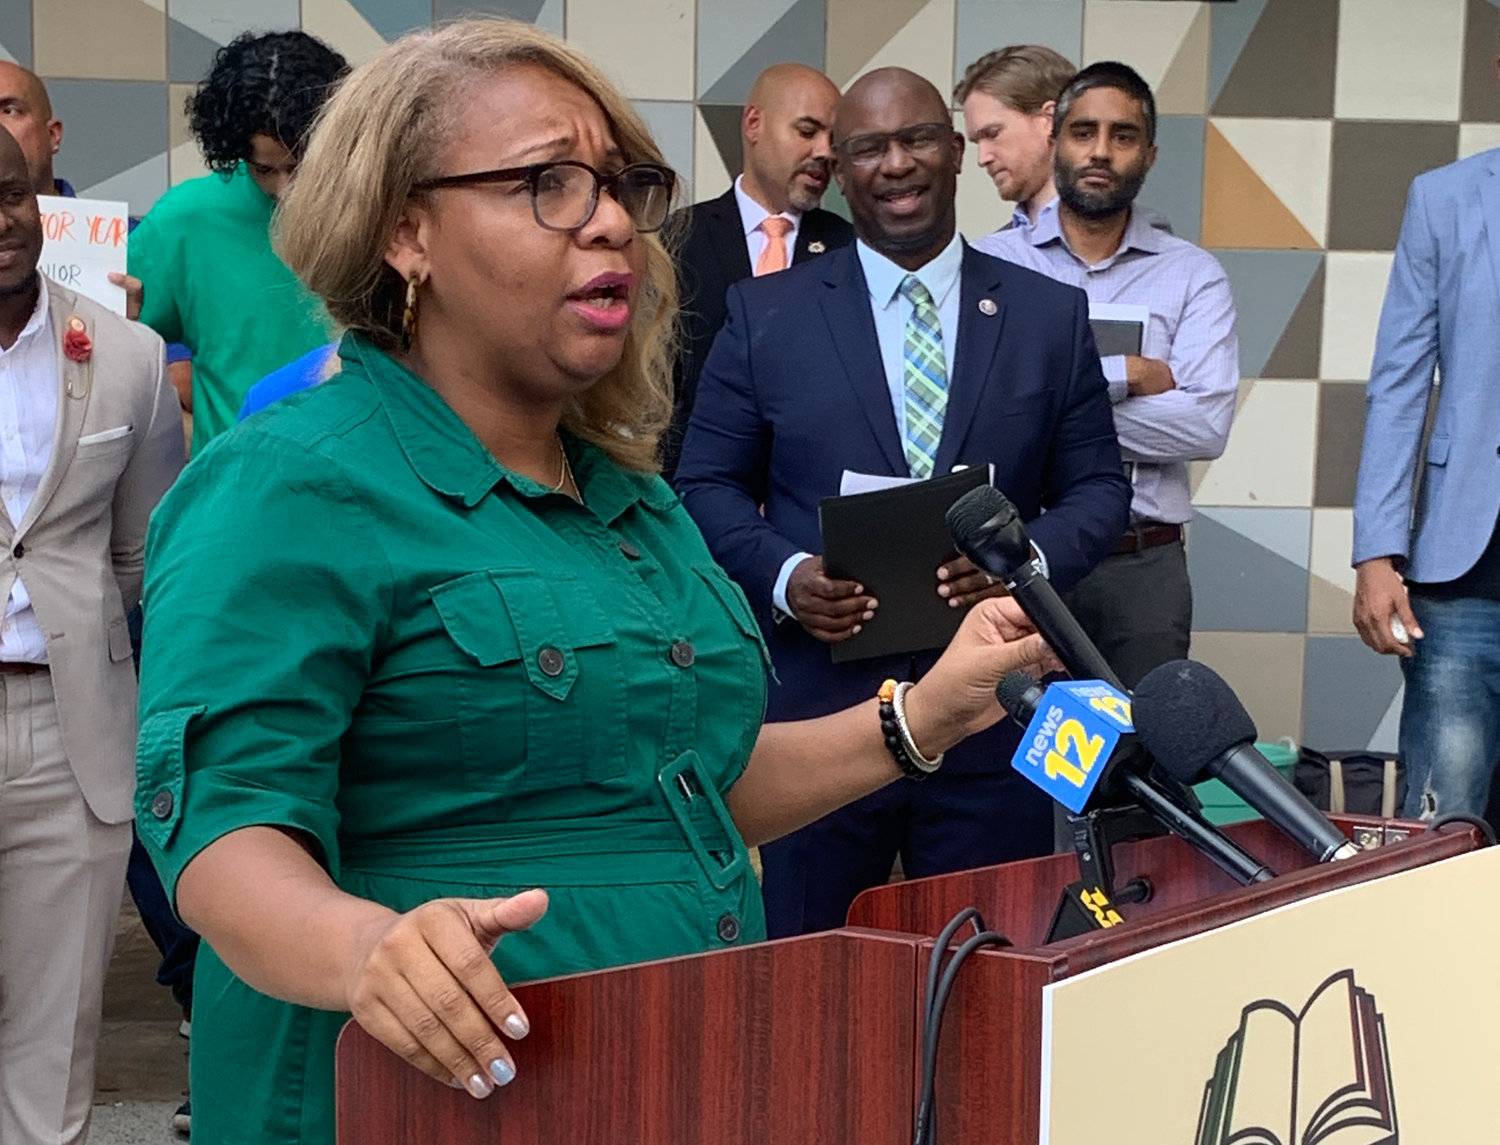 Meisha Porter will depart as New York City's schools chancellor at the end of the month after just nine months in office. That will allow Eric Adams to pick his own public schools leader when he takes over as Mayor in a few weeks.